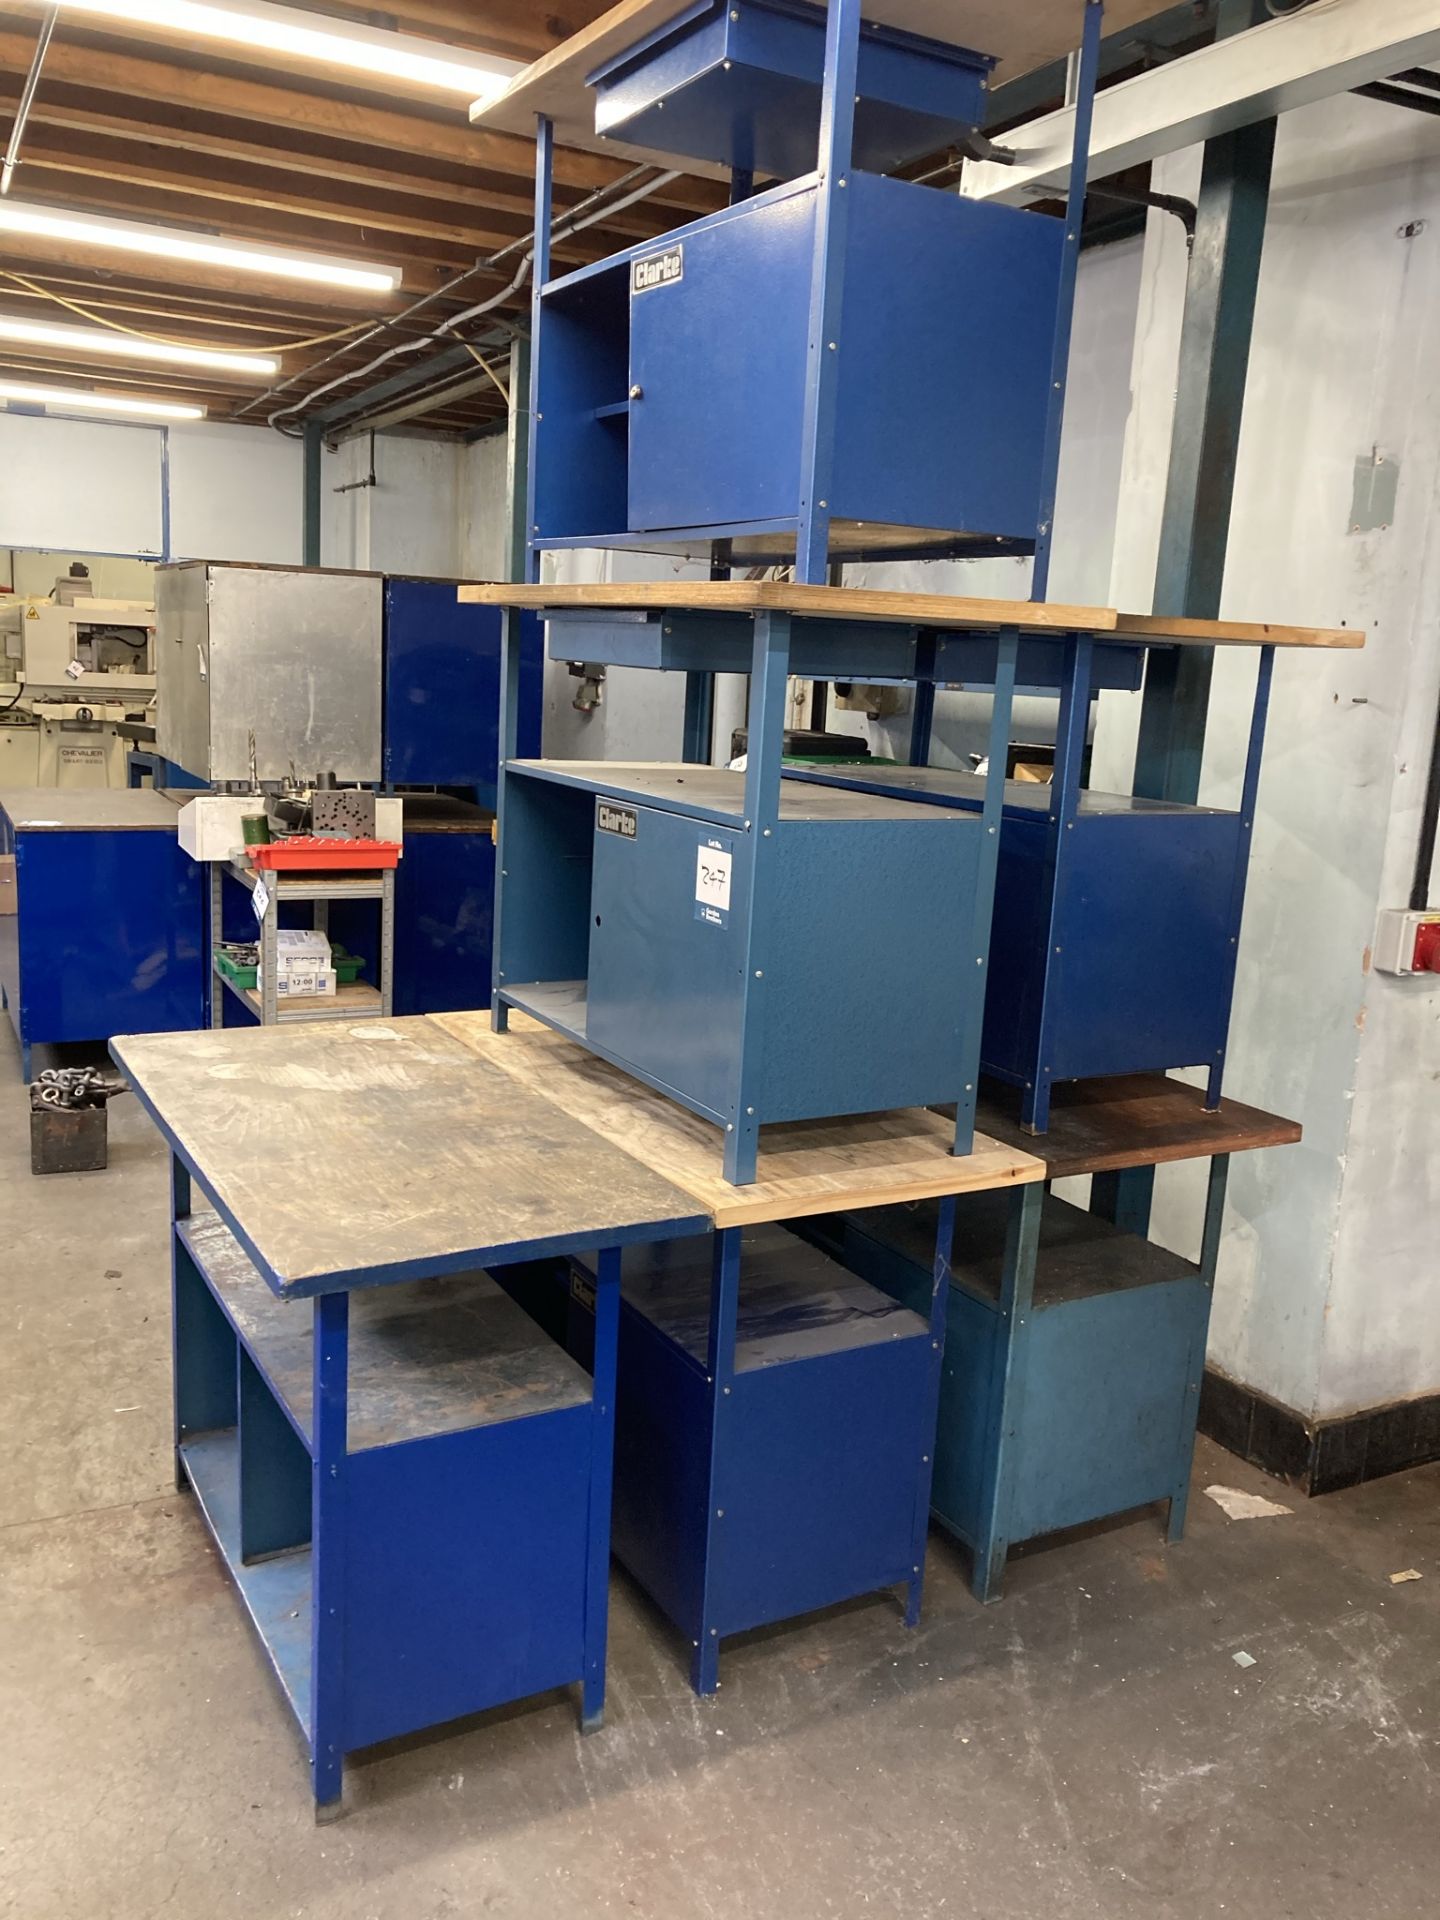 6x Clarke and other steel framed work benches/cabinets, 1200mm x 600mm